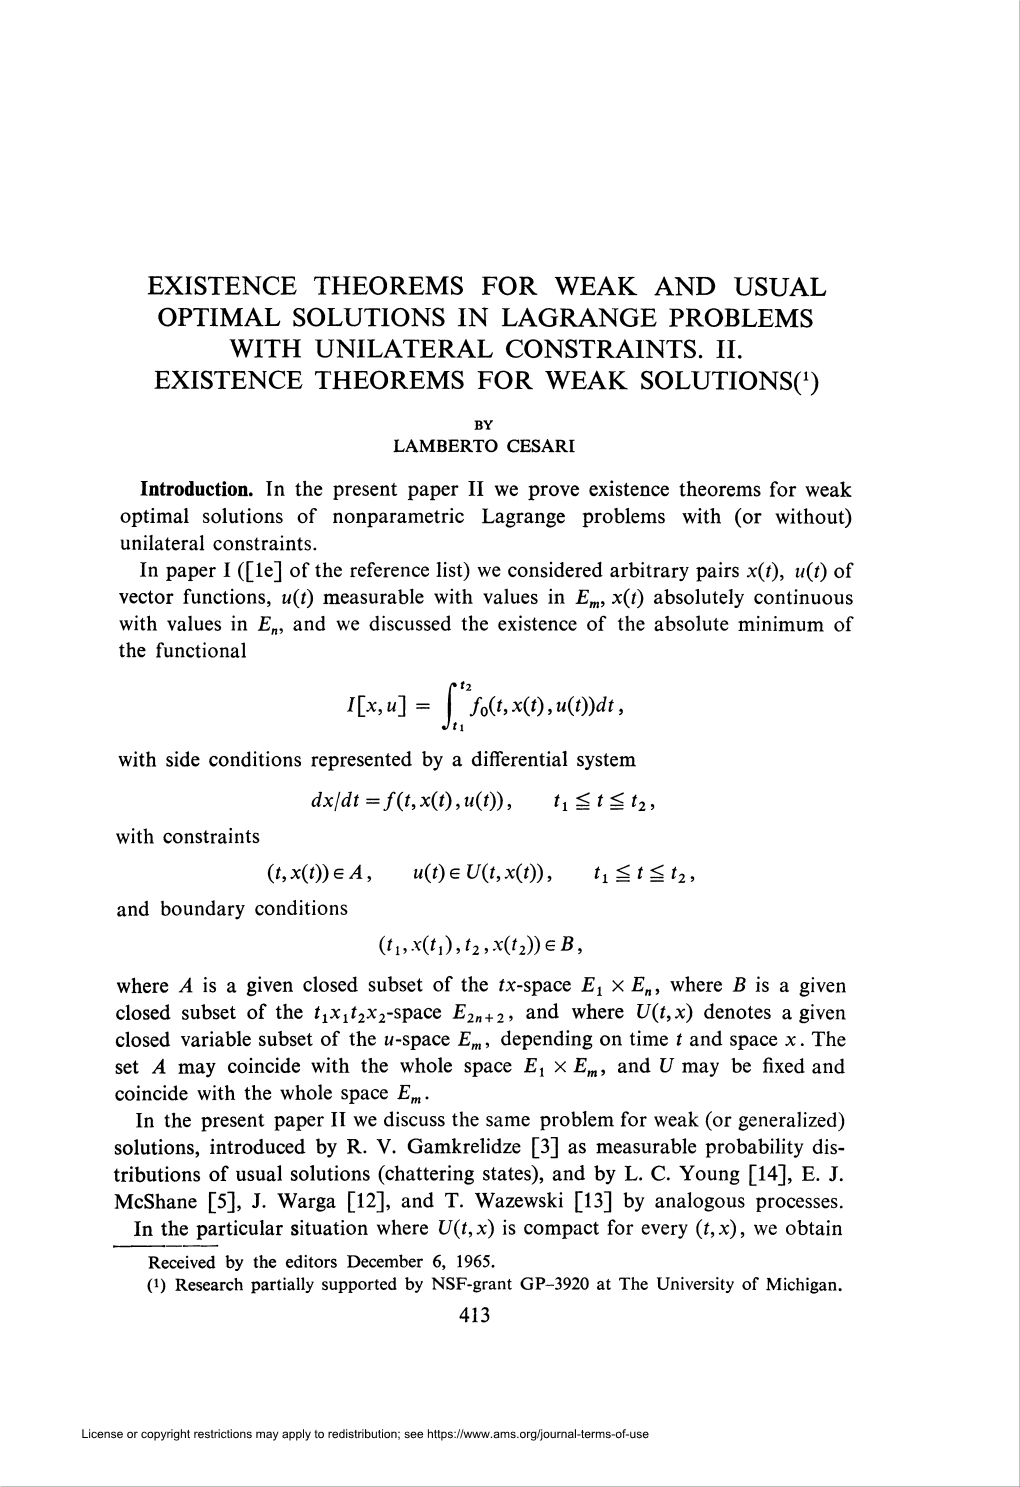 Existence Theorems for Weak and Usual Optimal Solutions in Lagrange Problems with Unilateral Constraints